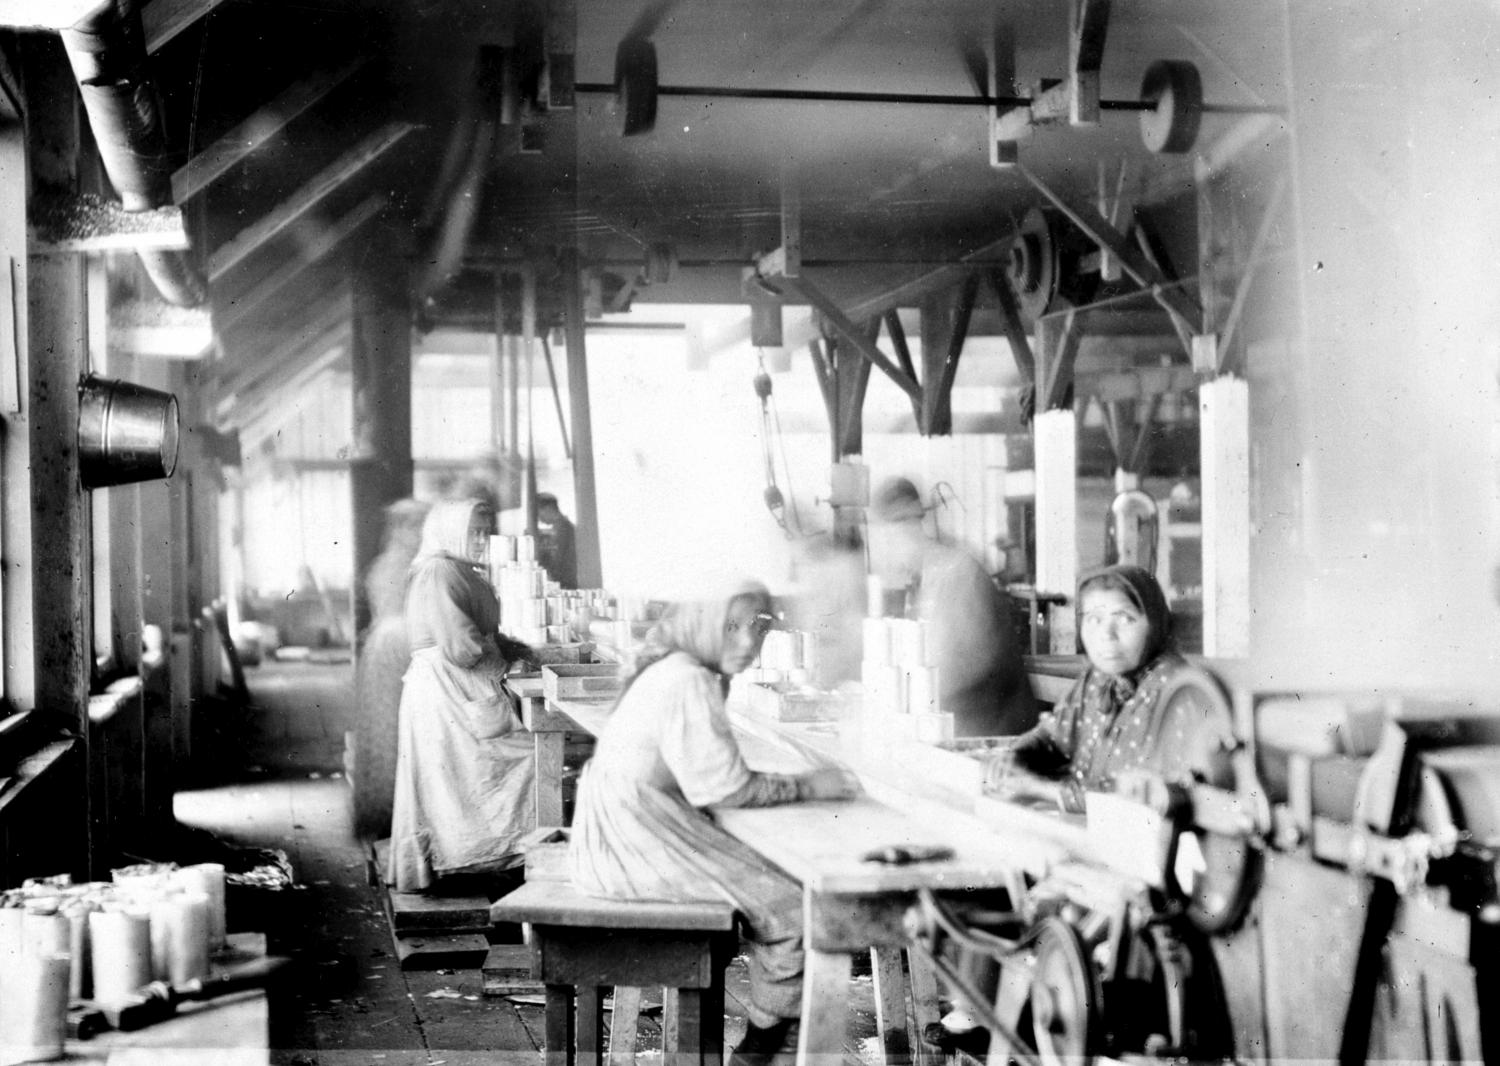 Indigenous women working at the Claxton cannery